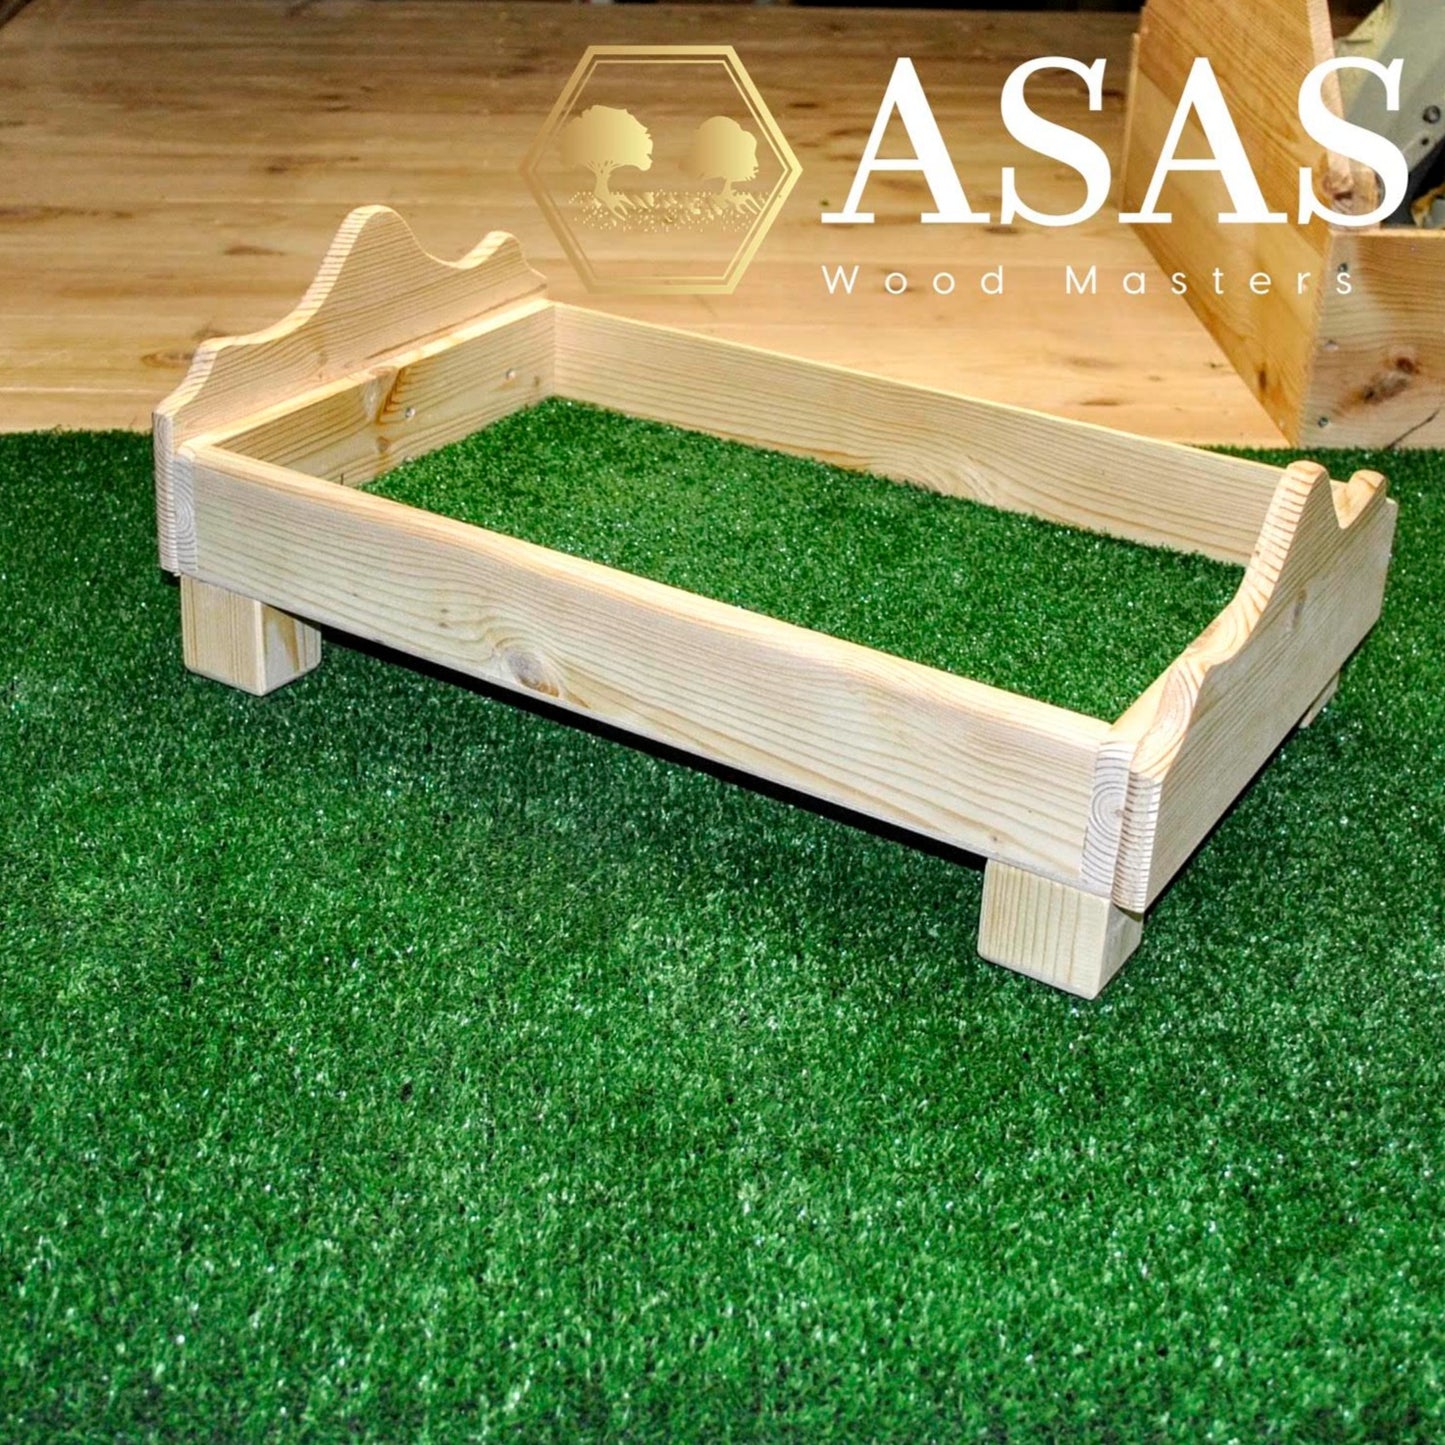 Wooden bunny rabbit bed, made by AsasWood